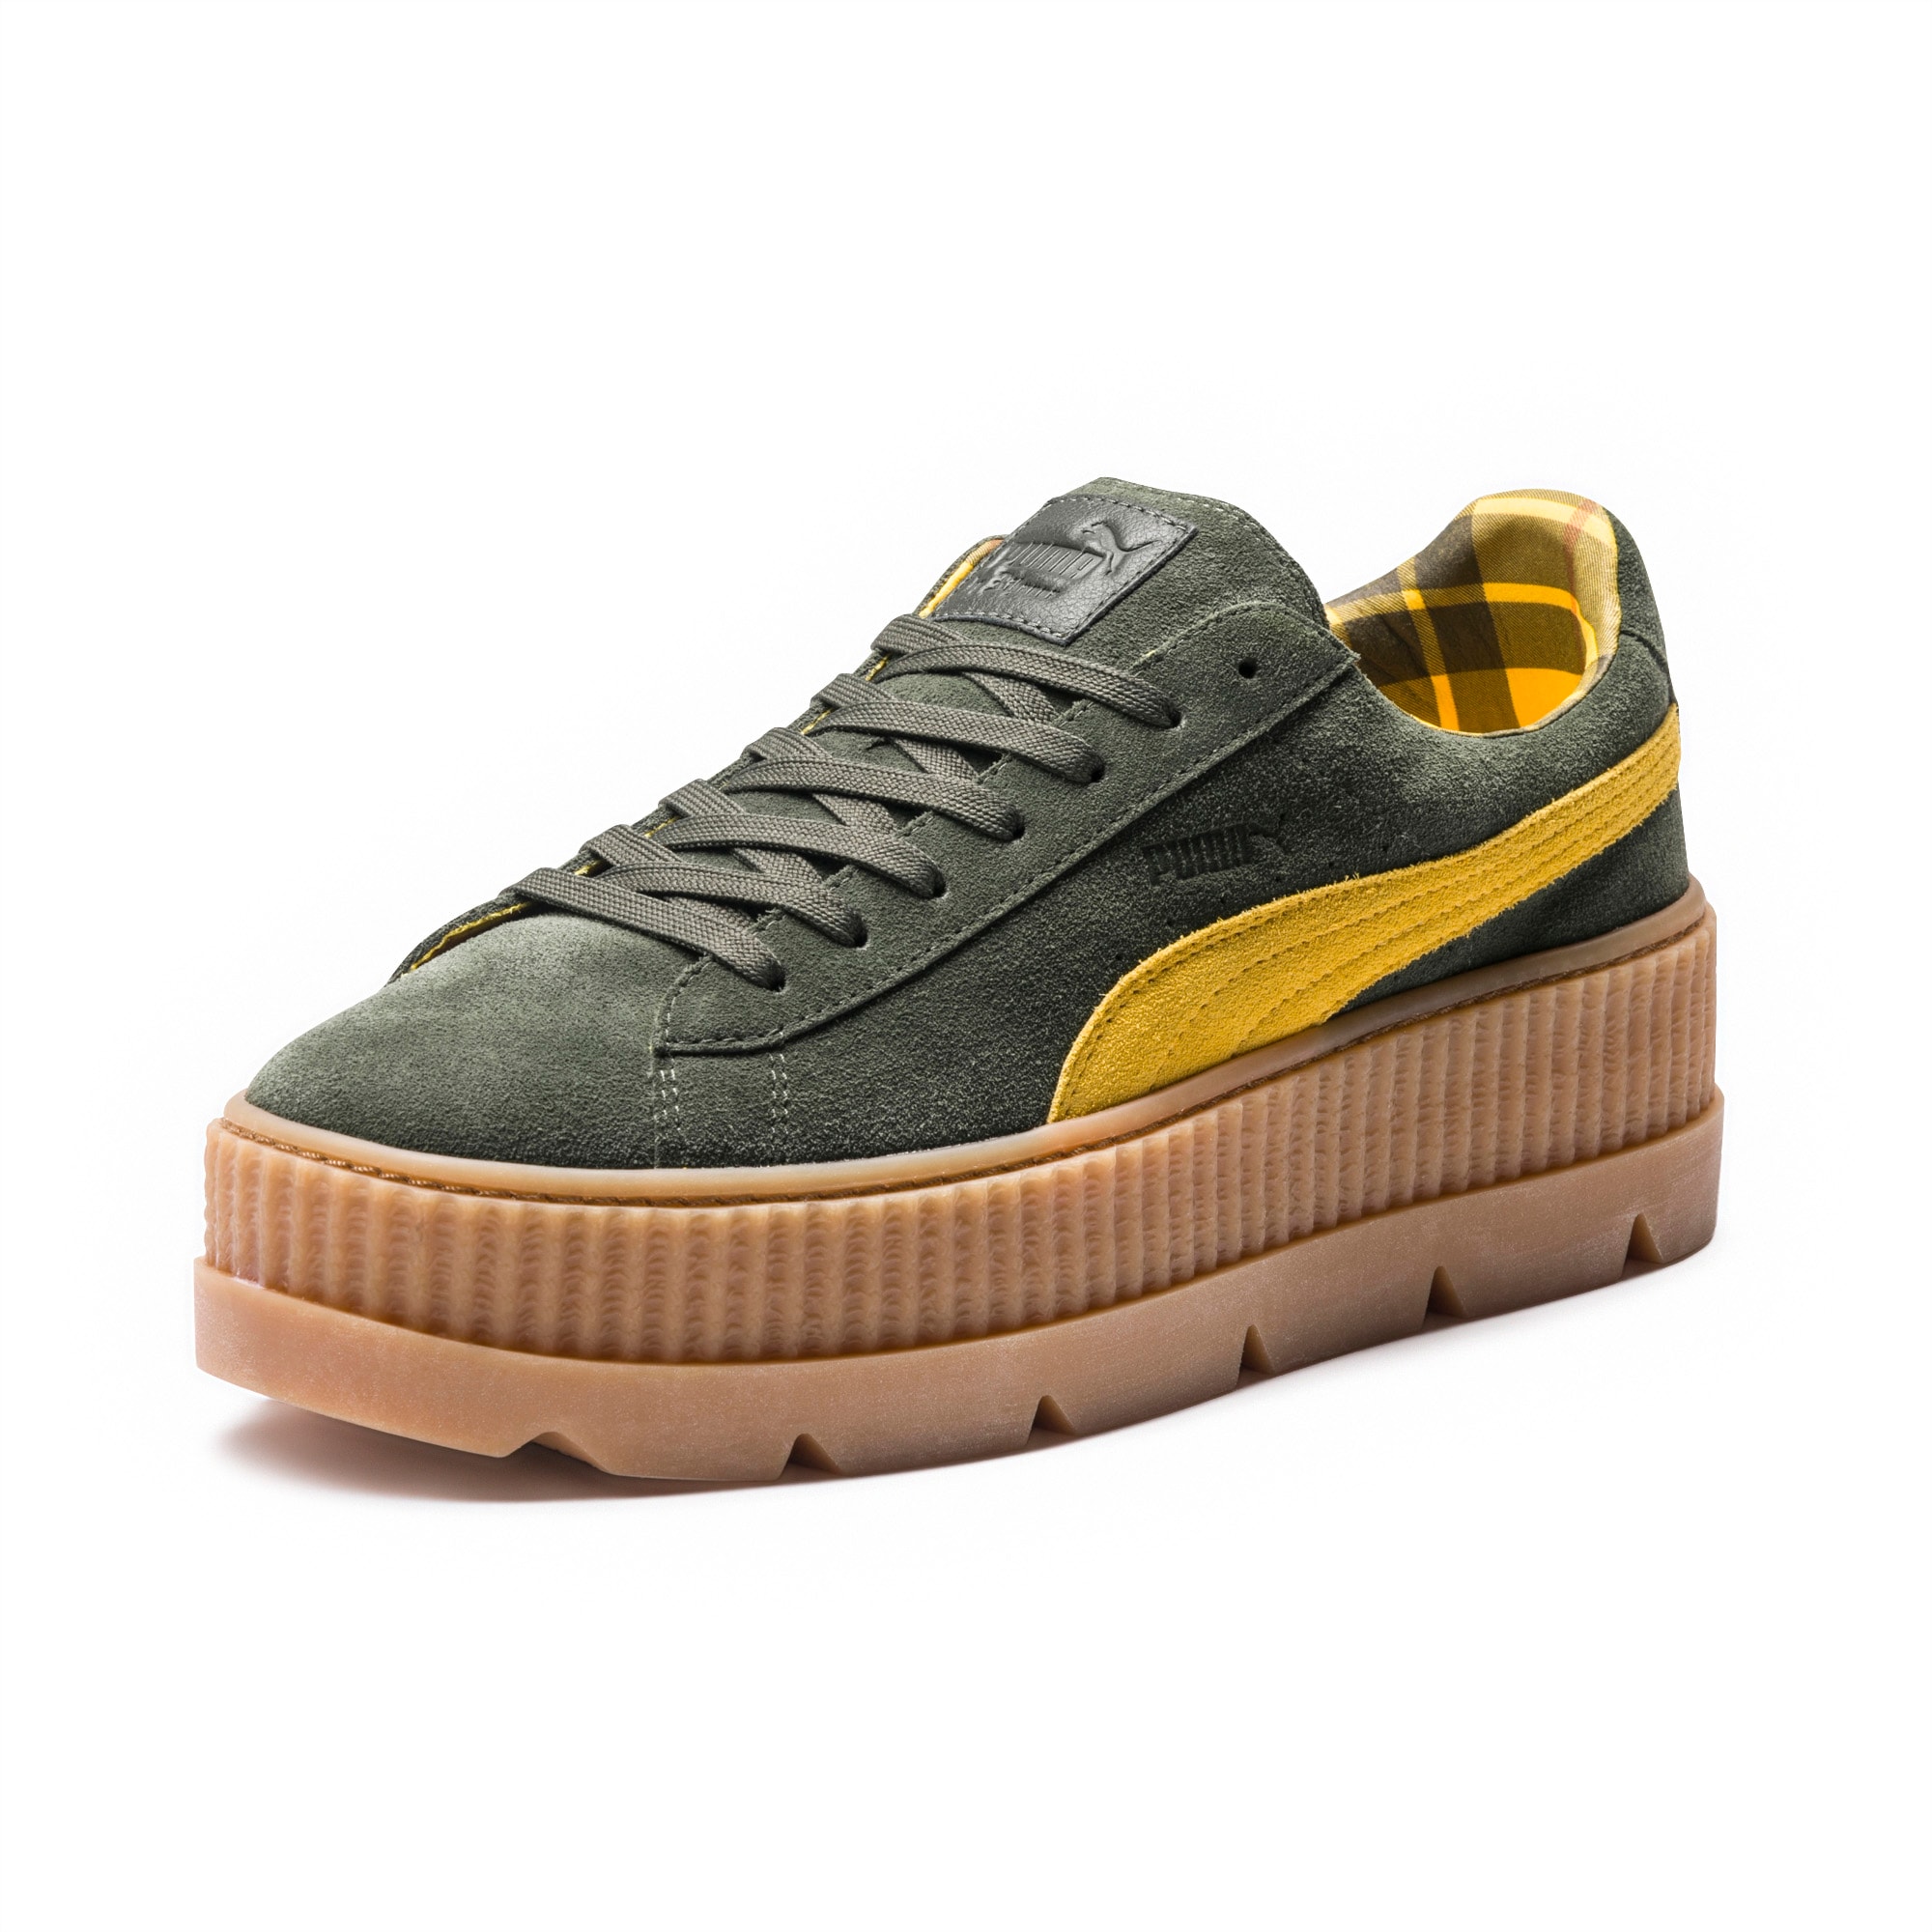 FENTY Suede Cleated Creeper Women's 